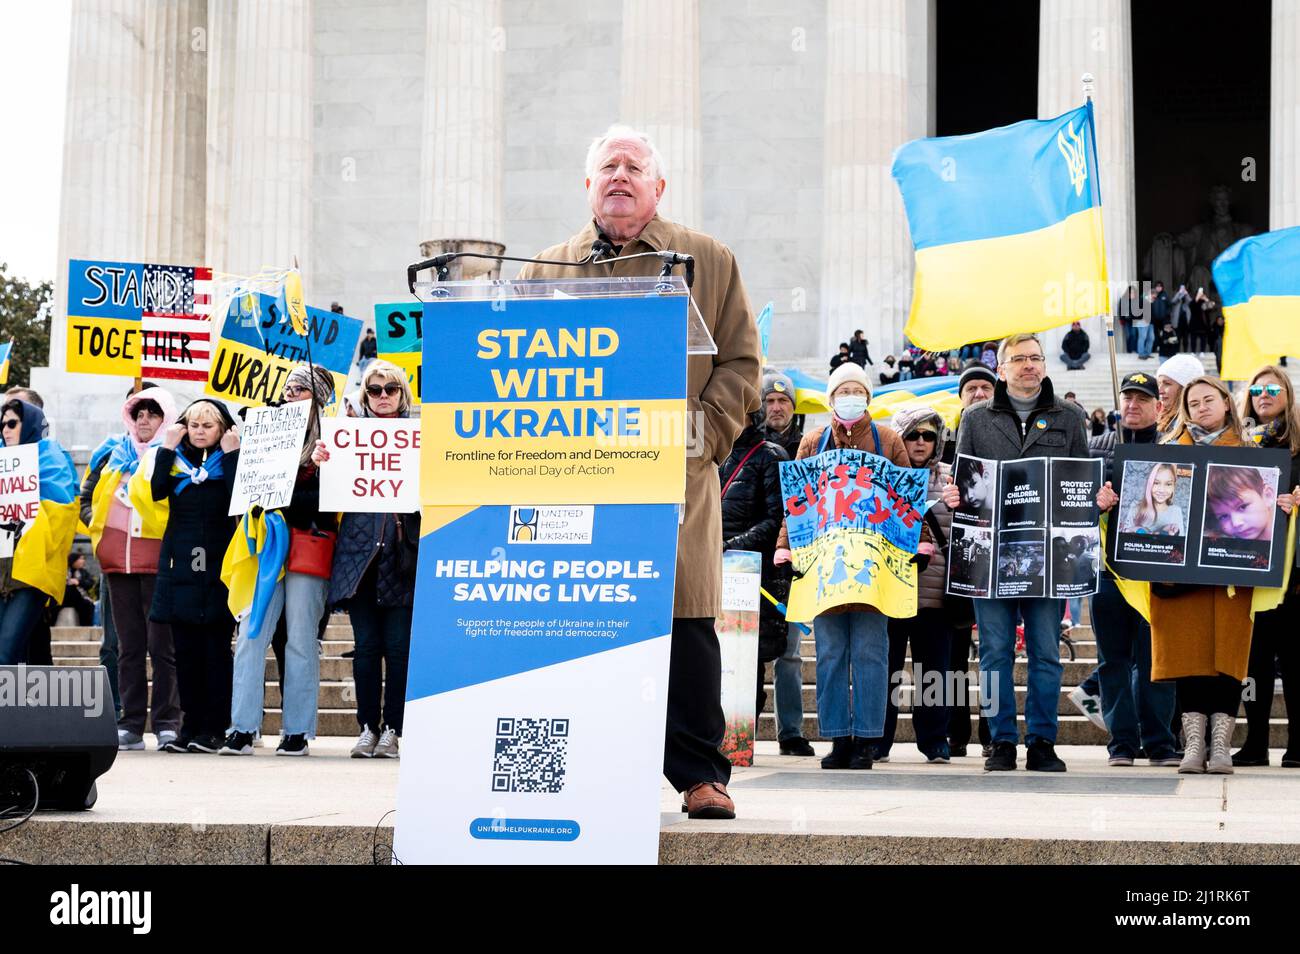 Washington, United States. 27th Mar, 2022. March 27, 2022 - Washington, DC, United States: Bill Kristol, Director of Defending Democracy and founder of the Weekly Standard, speaking at a Stand With Ukraine rally at the Lincoln Memorial. (Photo by Michael Brochstein/Sipa USA) Credit: Sipa USA/Alamy Live News Stock Photo